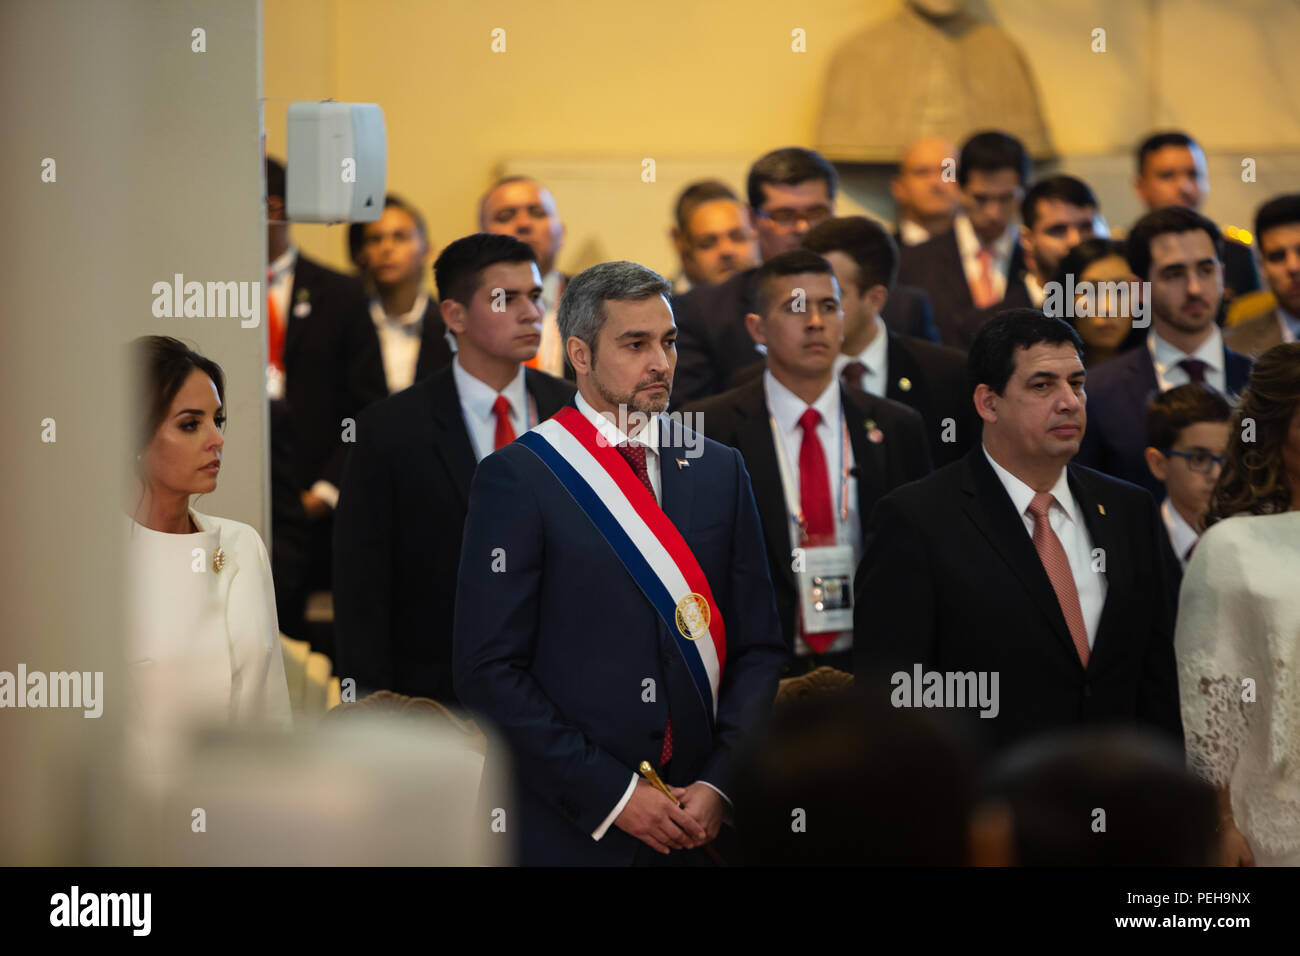 Asuncion, Paraguay. 15th Aug, 2018. Paraguay's first lady Silvana Lopez Moreira (L), new President Mario Abdo Benitez and Vice President Hugo Velazquez attend a Te Deum service at Metropolitan Cathedral of Asuncion following the inauguration ceremony of Paraguay's new President in Asuncion, Paraguay. Credit: Andre M. Chang/ARDUOPRESS/Alamy Live News Stock Photo